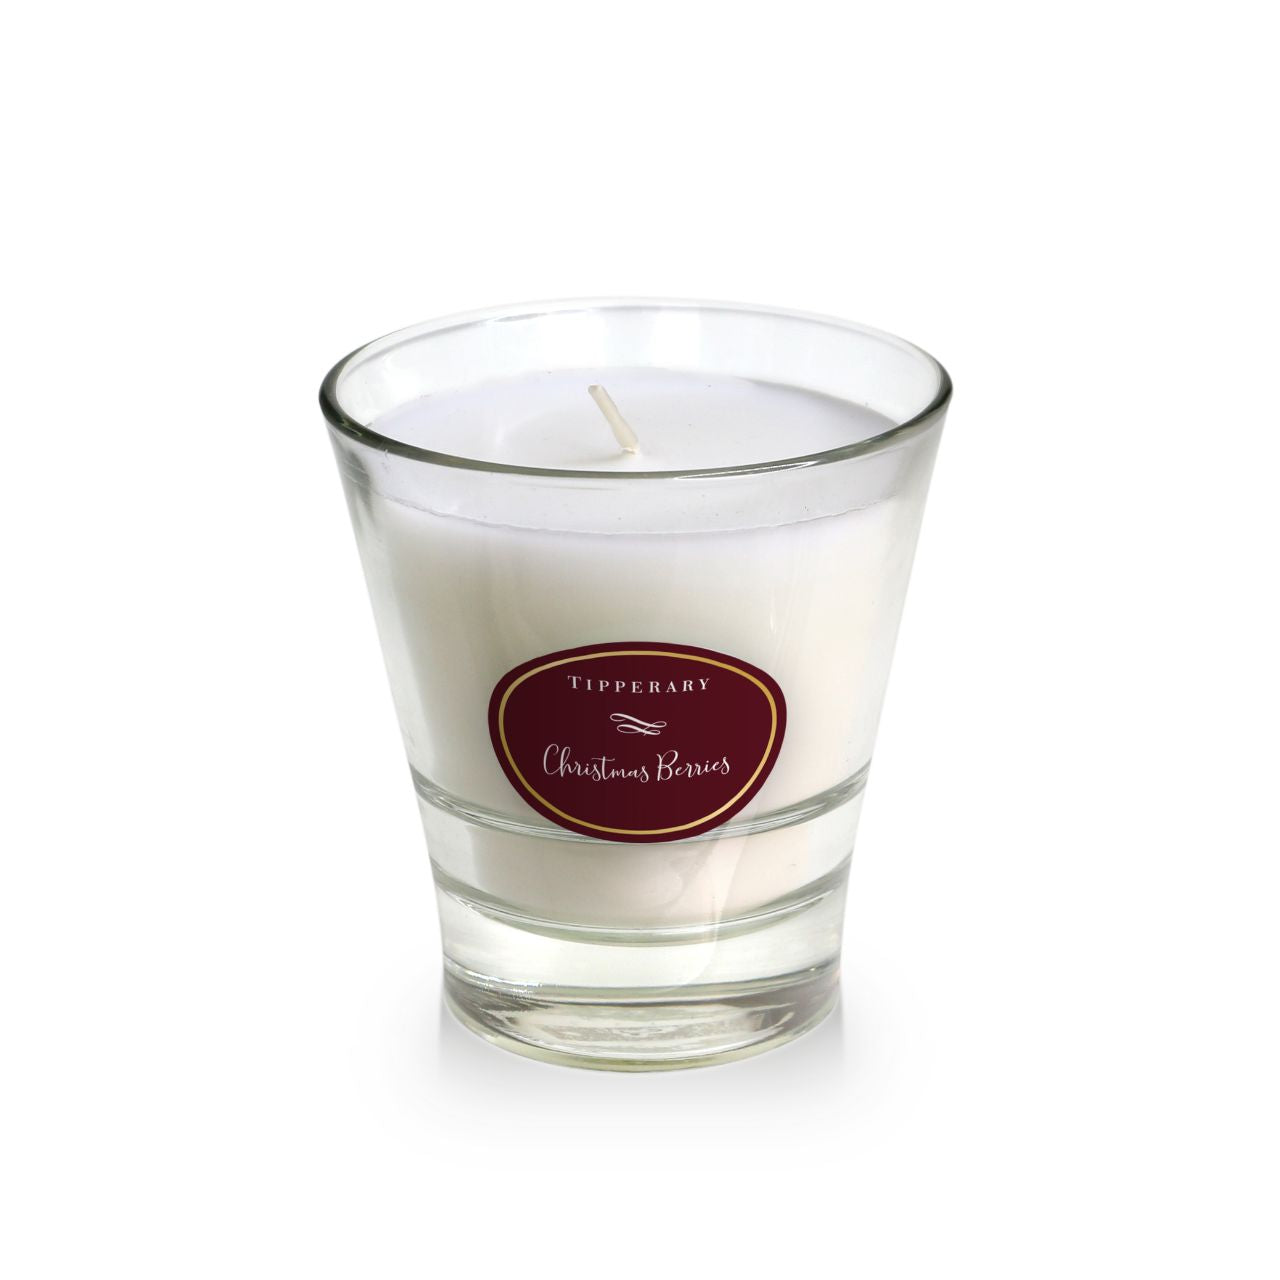 Christmas Berries Poinsettia Tumbler Candle by Tipperary  Christmas Berries express the irresistible freshness of a bouquet of roses, sweetened with blackcurrant leaves. A beautiful Christmas scent for the festive season.